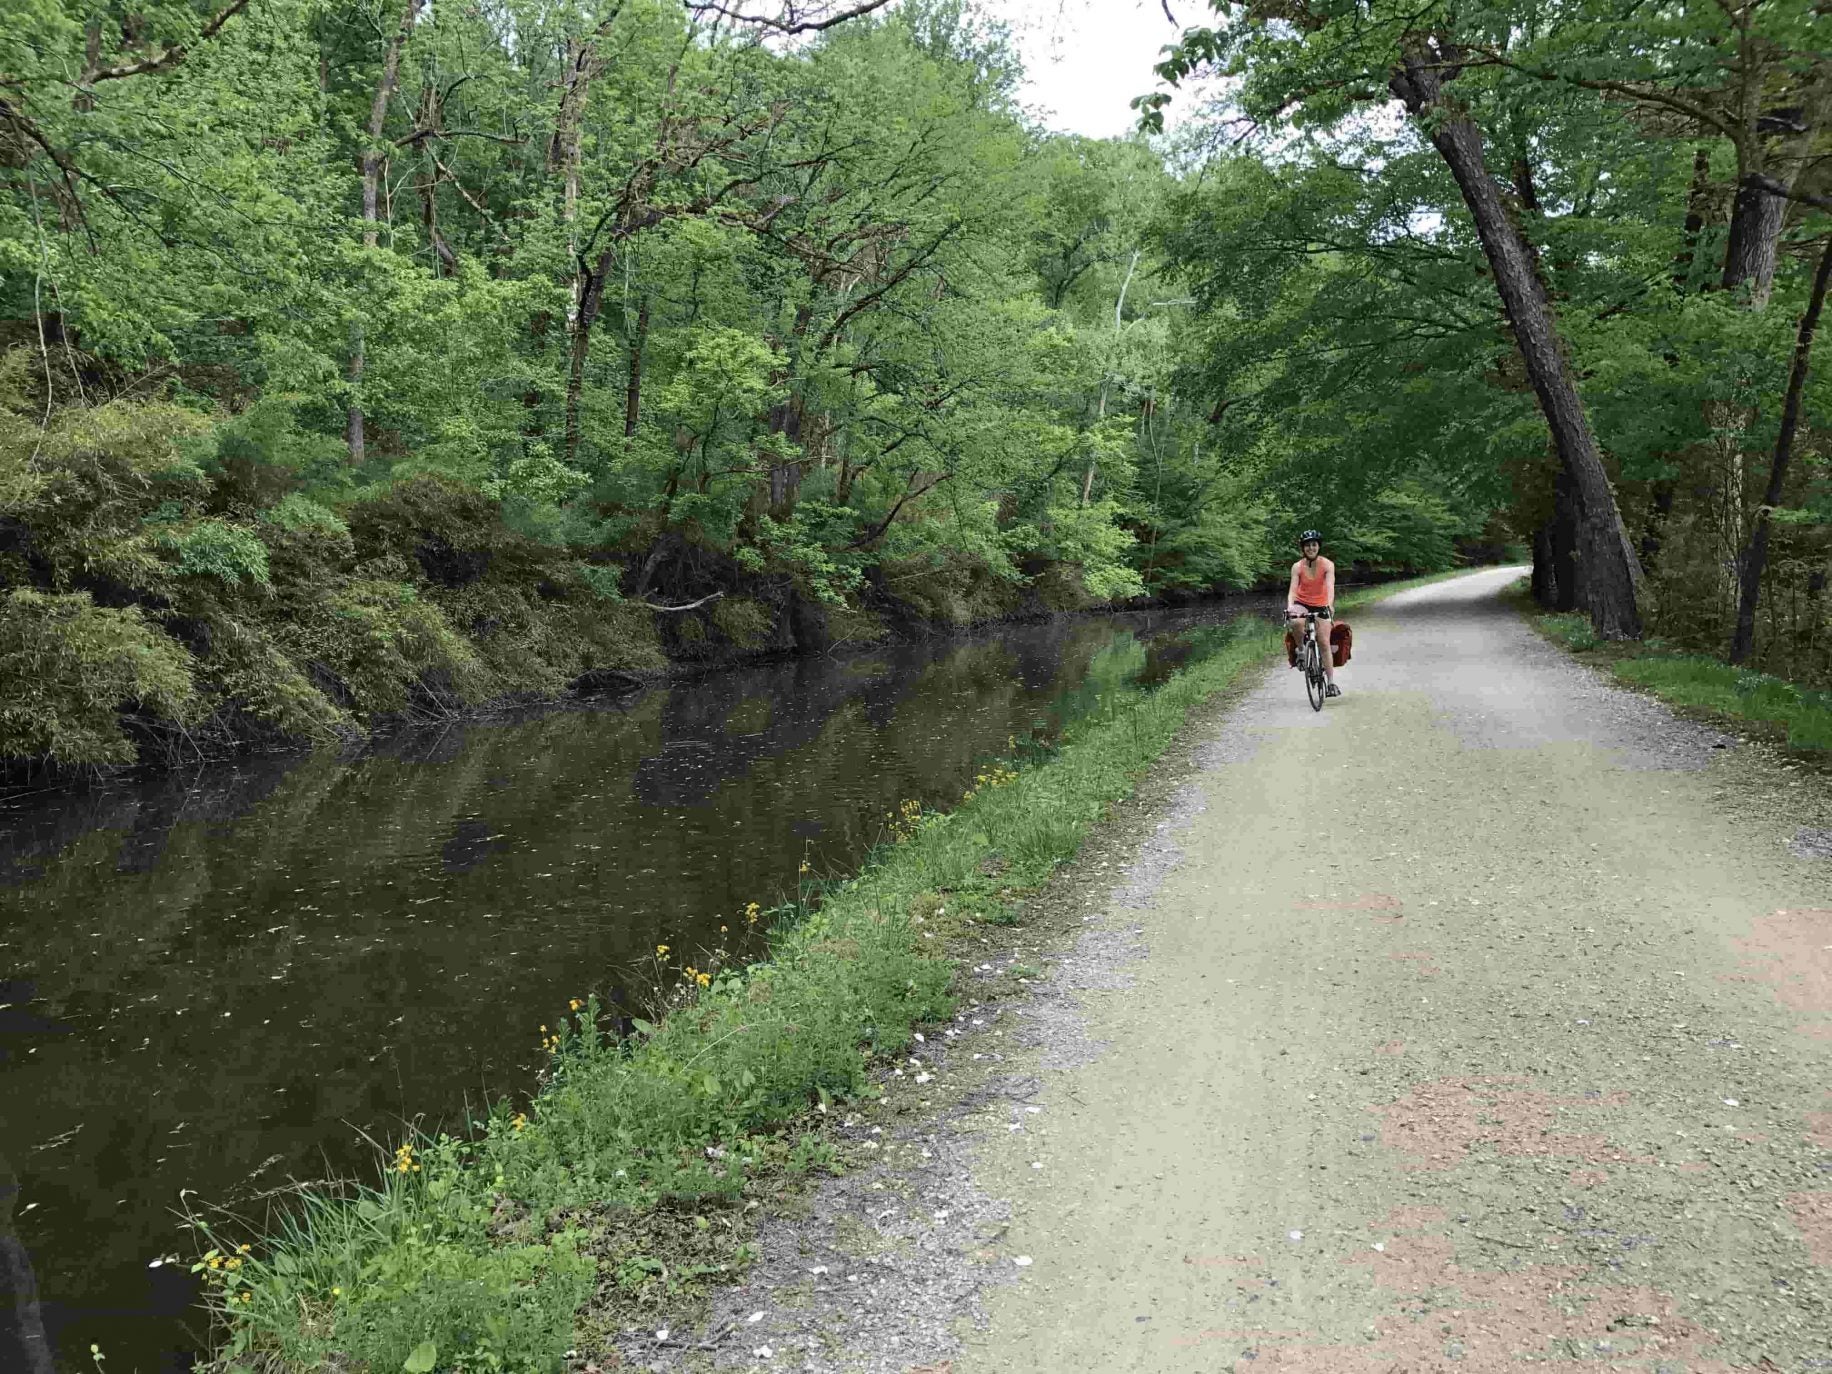 biking along the river on the c&o canal towpath